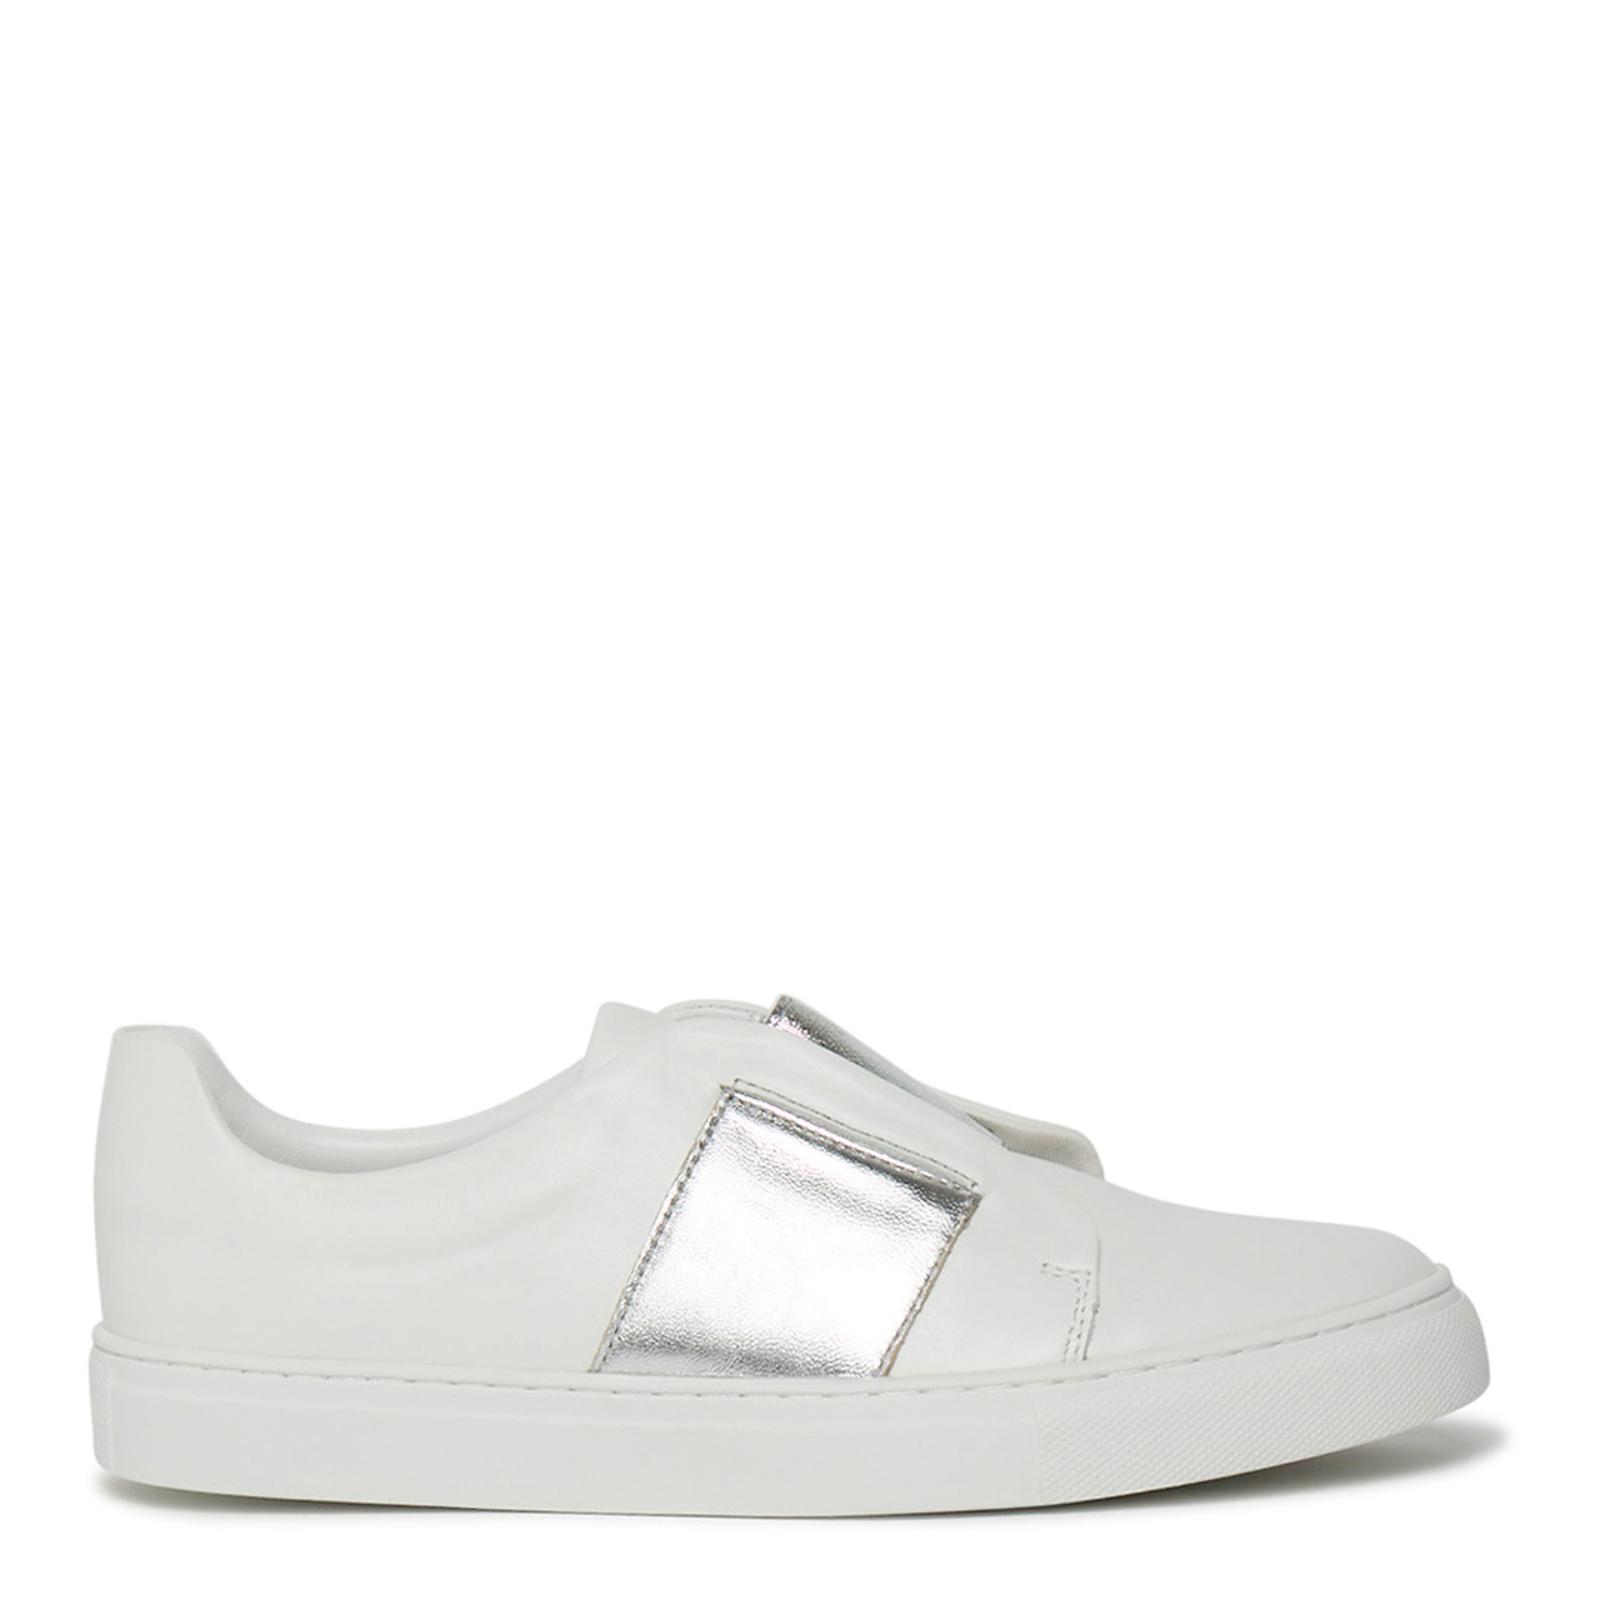 White/Silver Elastic Leather Sneakers - BrandAlley